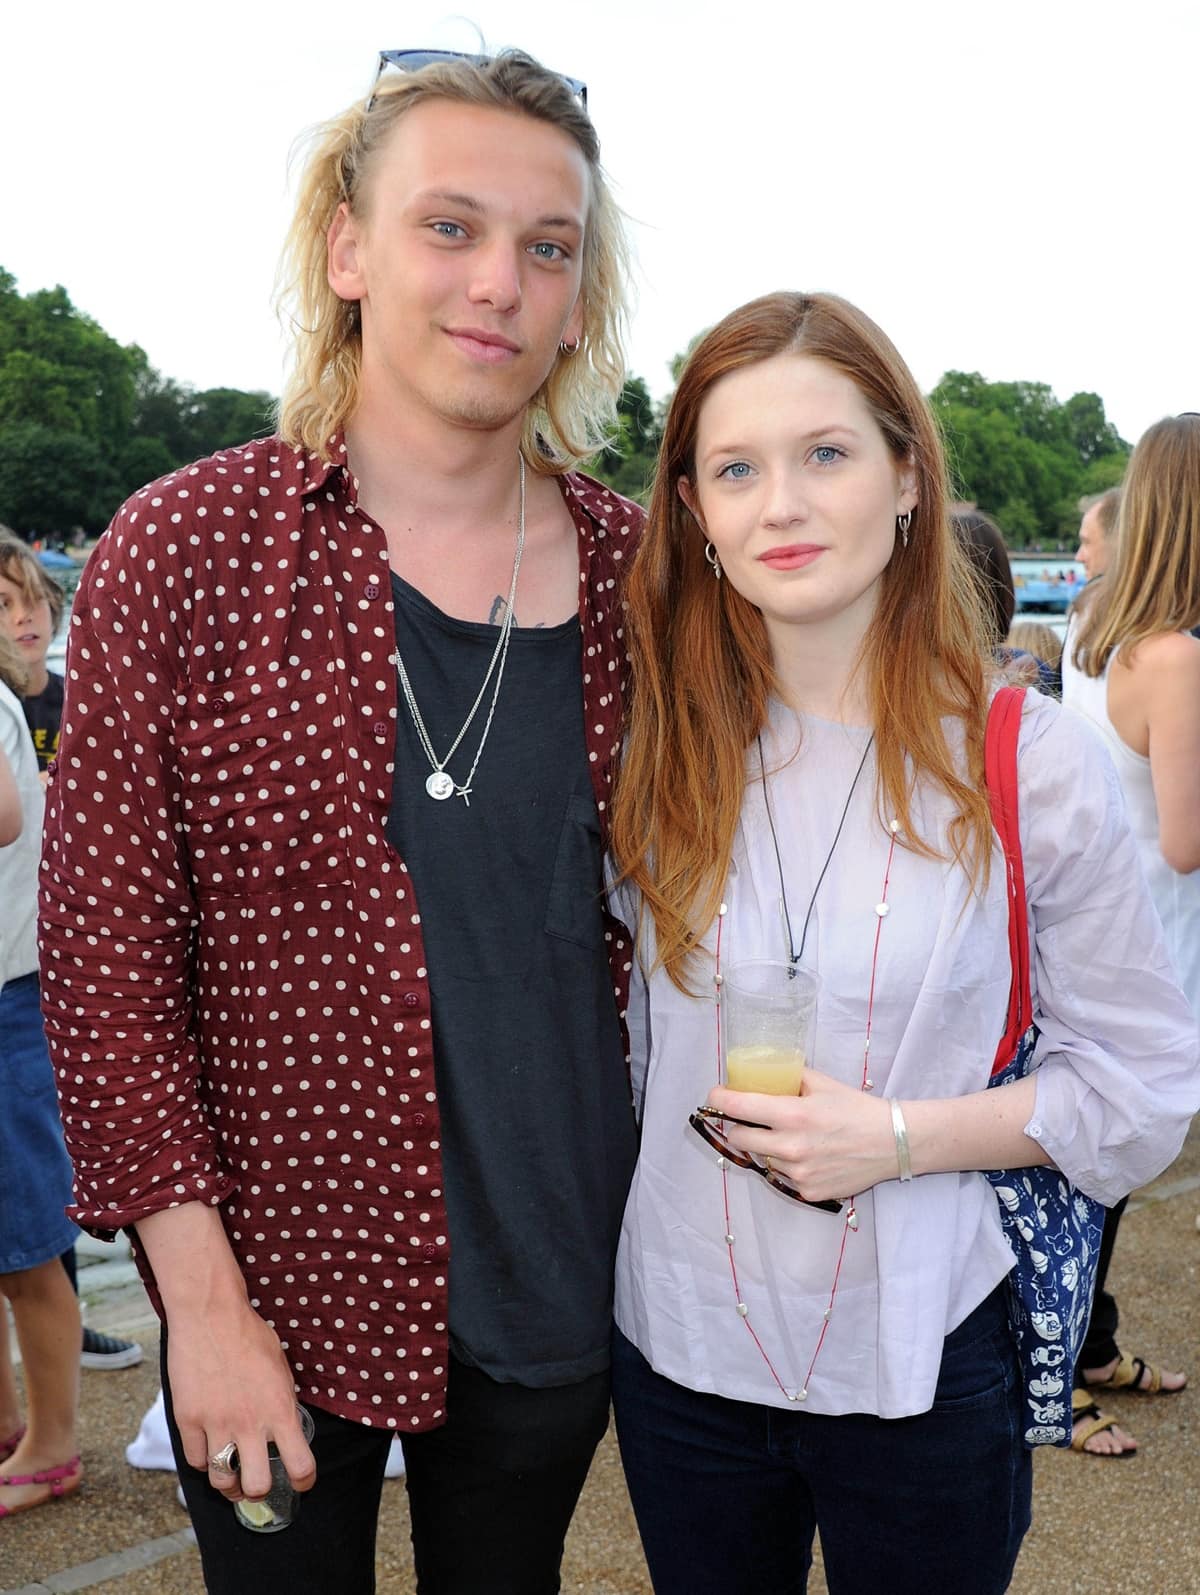 Jamie Campbell Bower and Bonnie Wright met on the set of Harry Potter, got engaged in 2011, and split in 2012